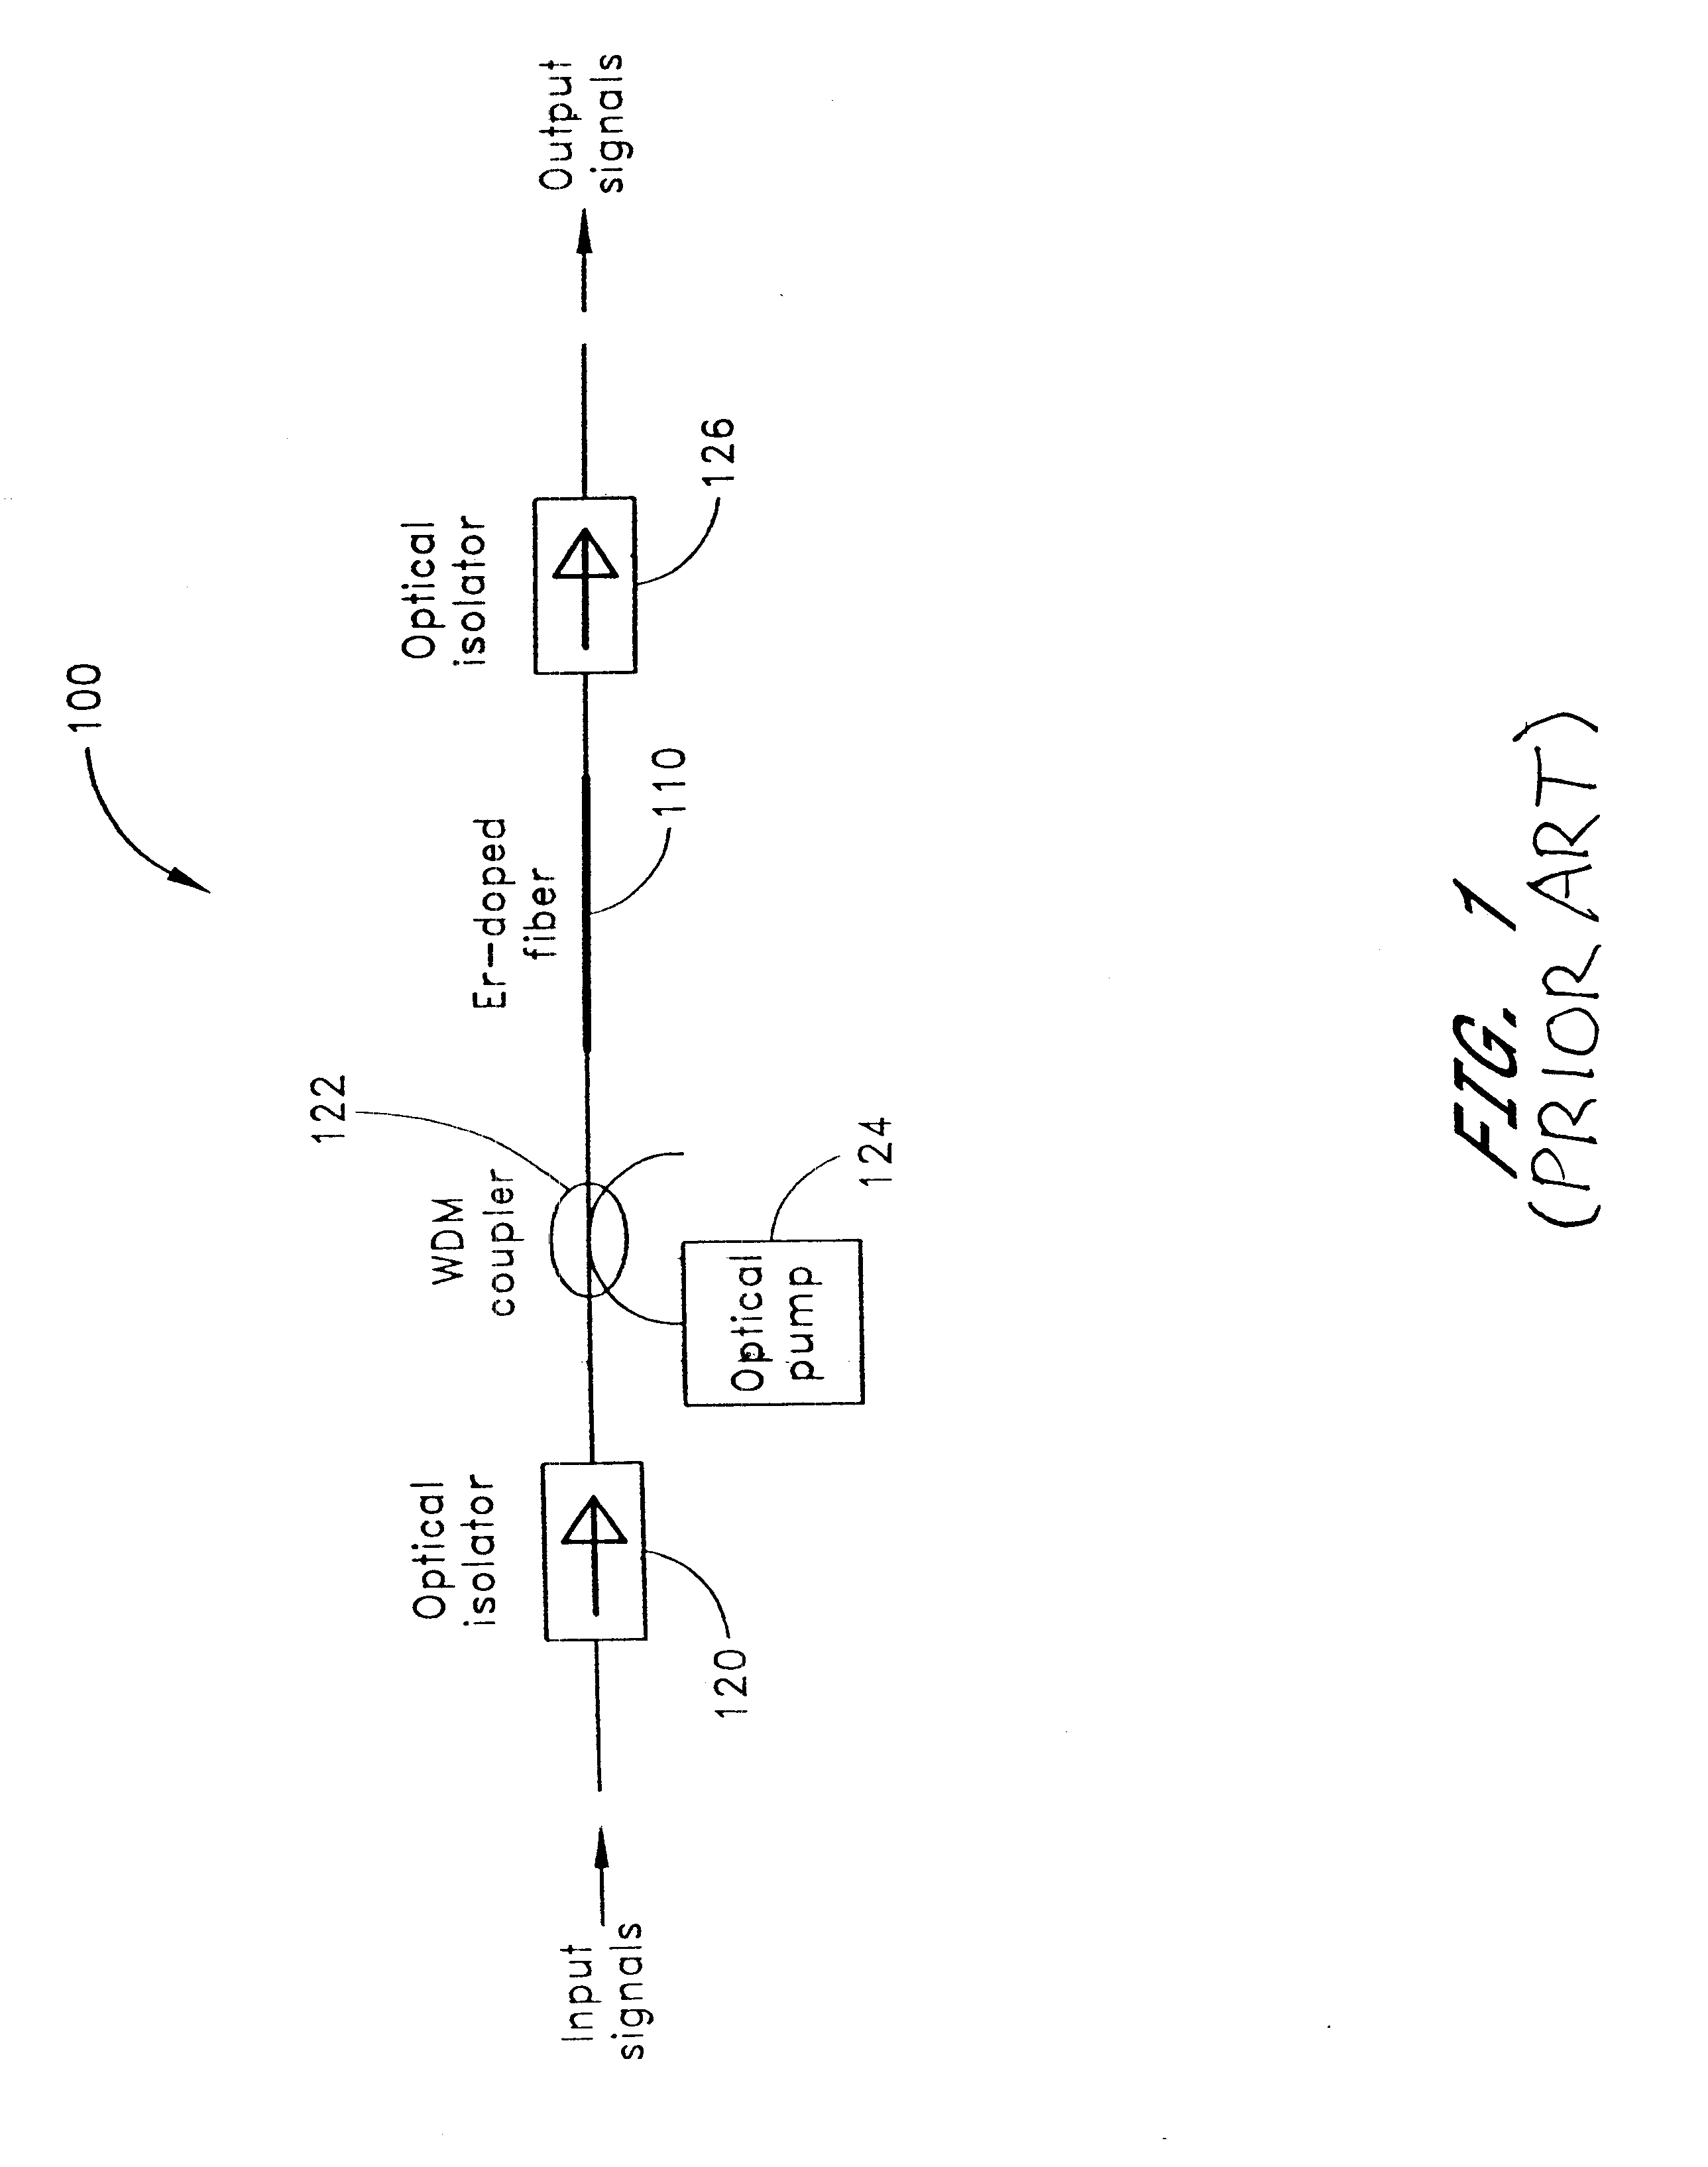 Method of amplifying optical signals using erbium-doped materials with extremely broad bandwidths